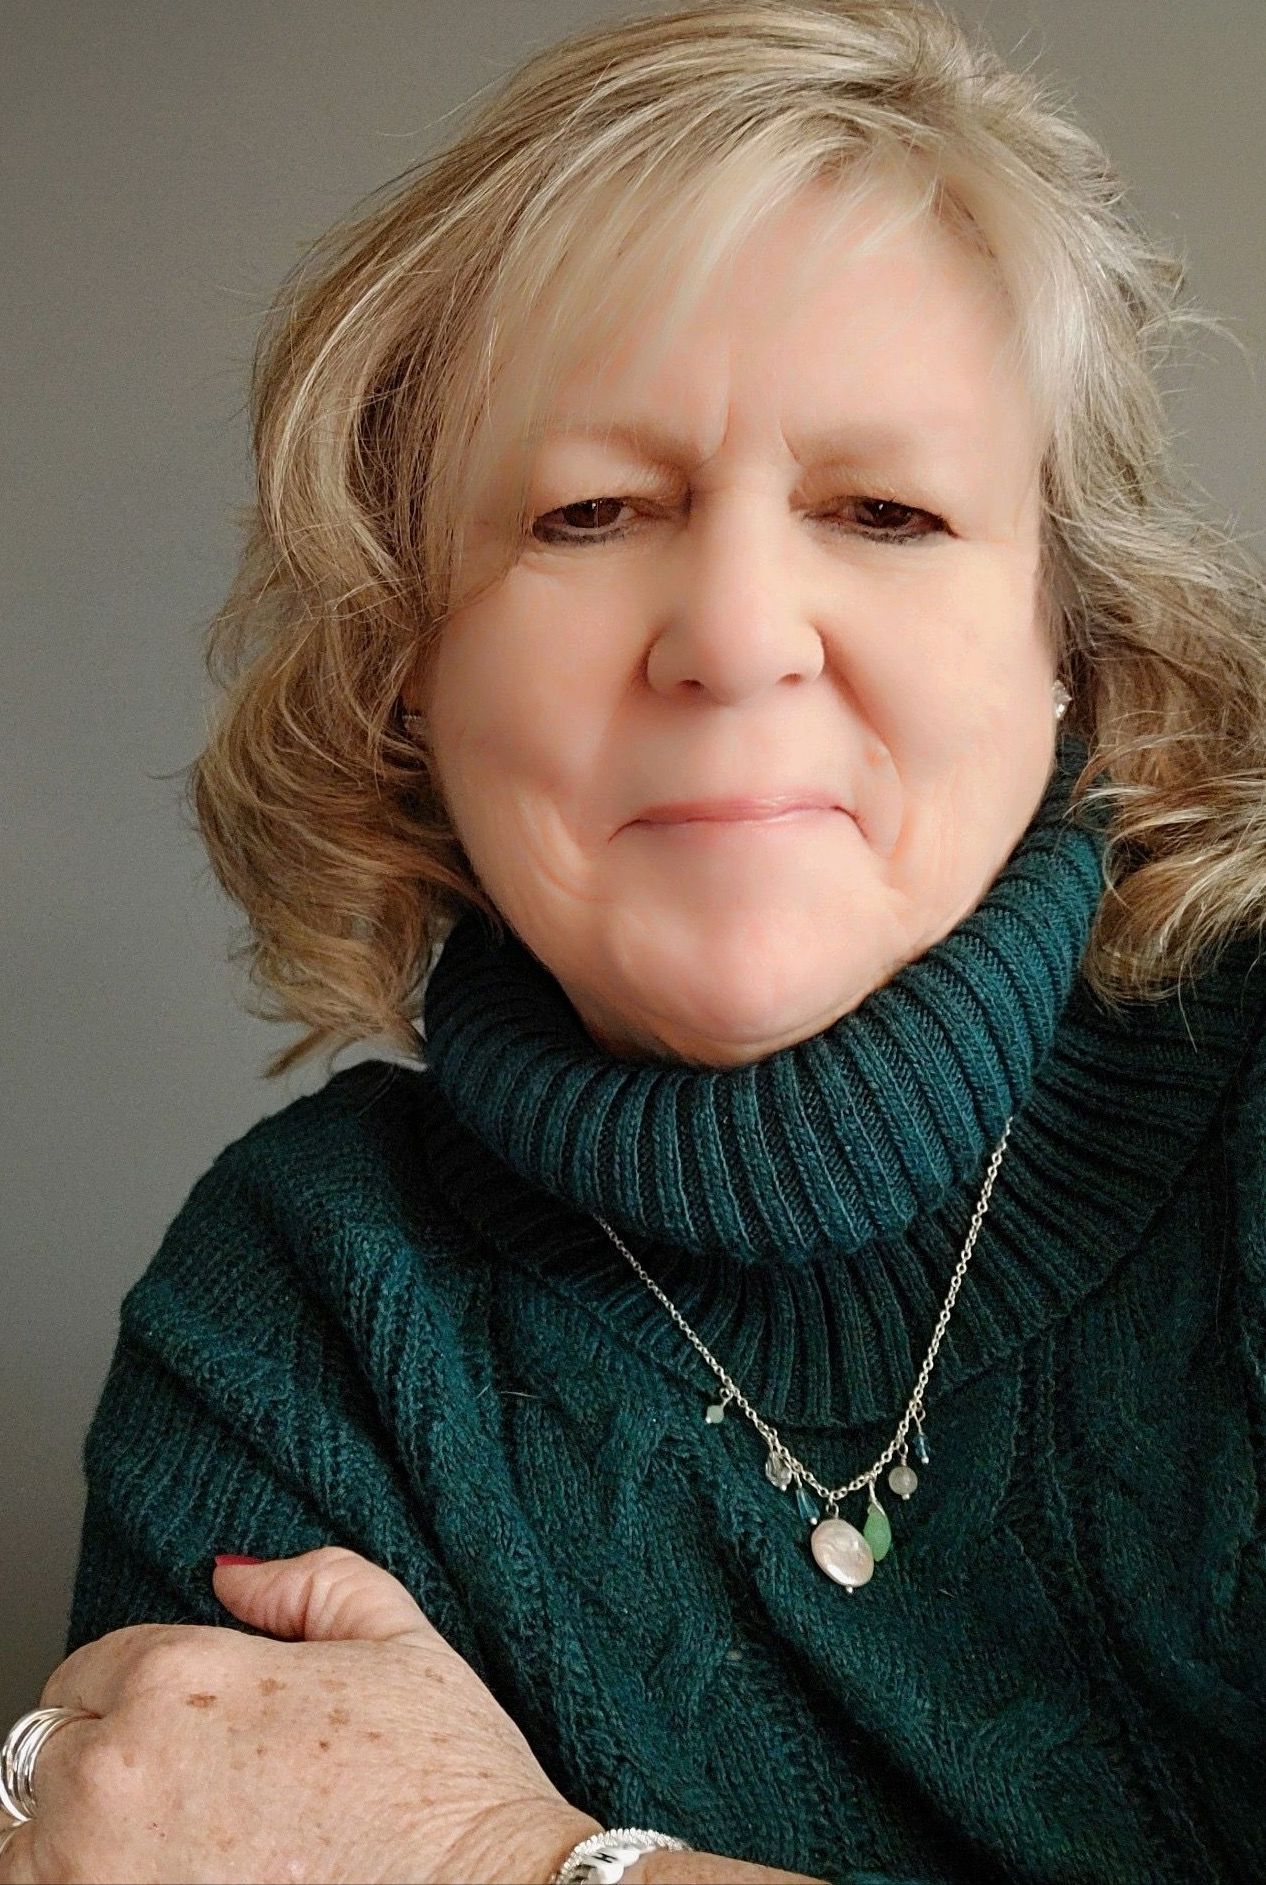 a woman is wearing a green sweater and a necklace .